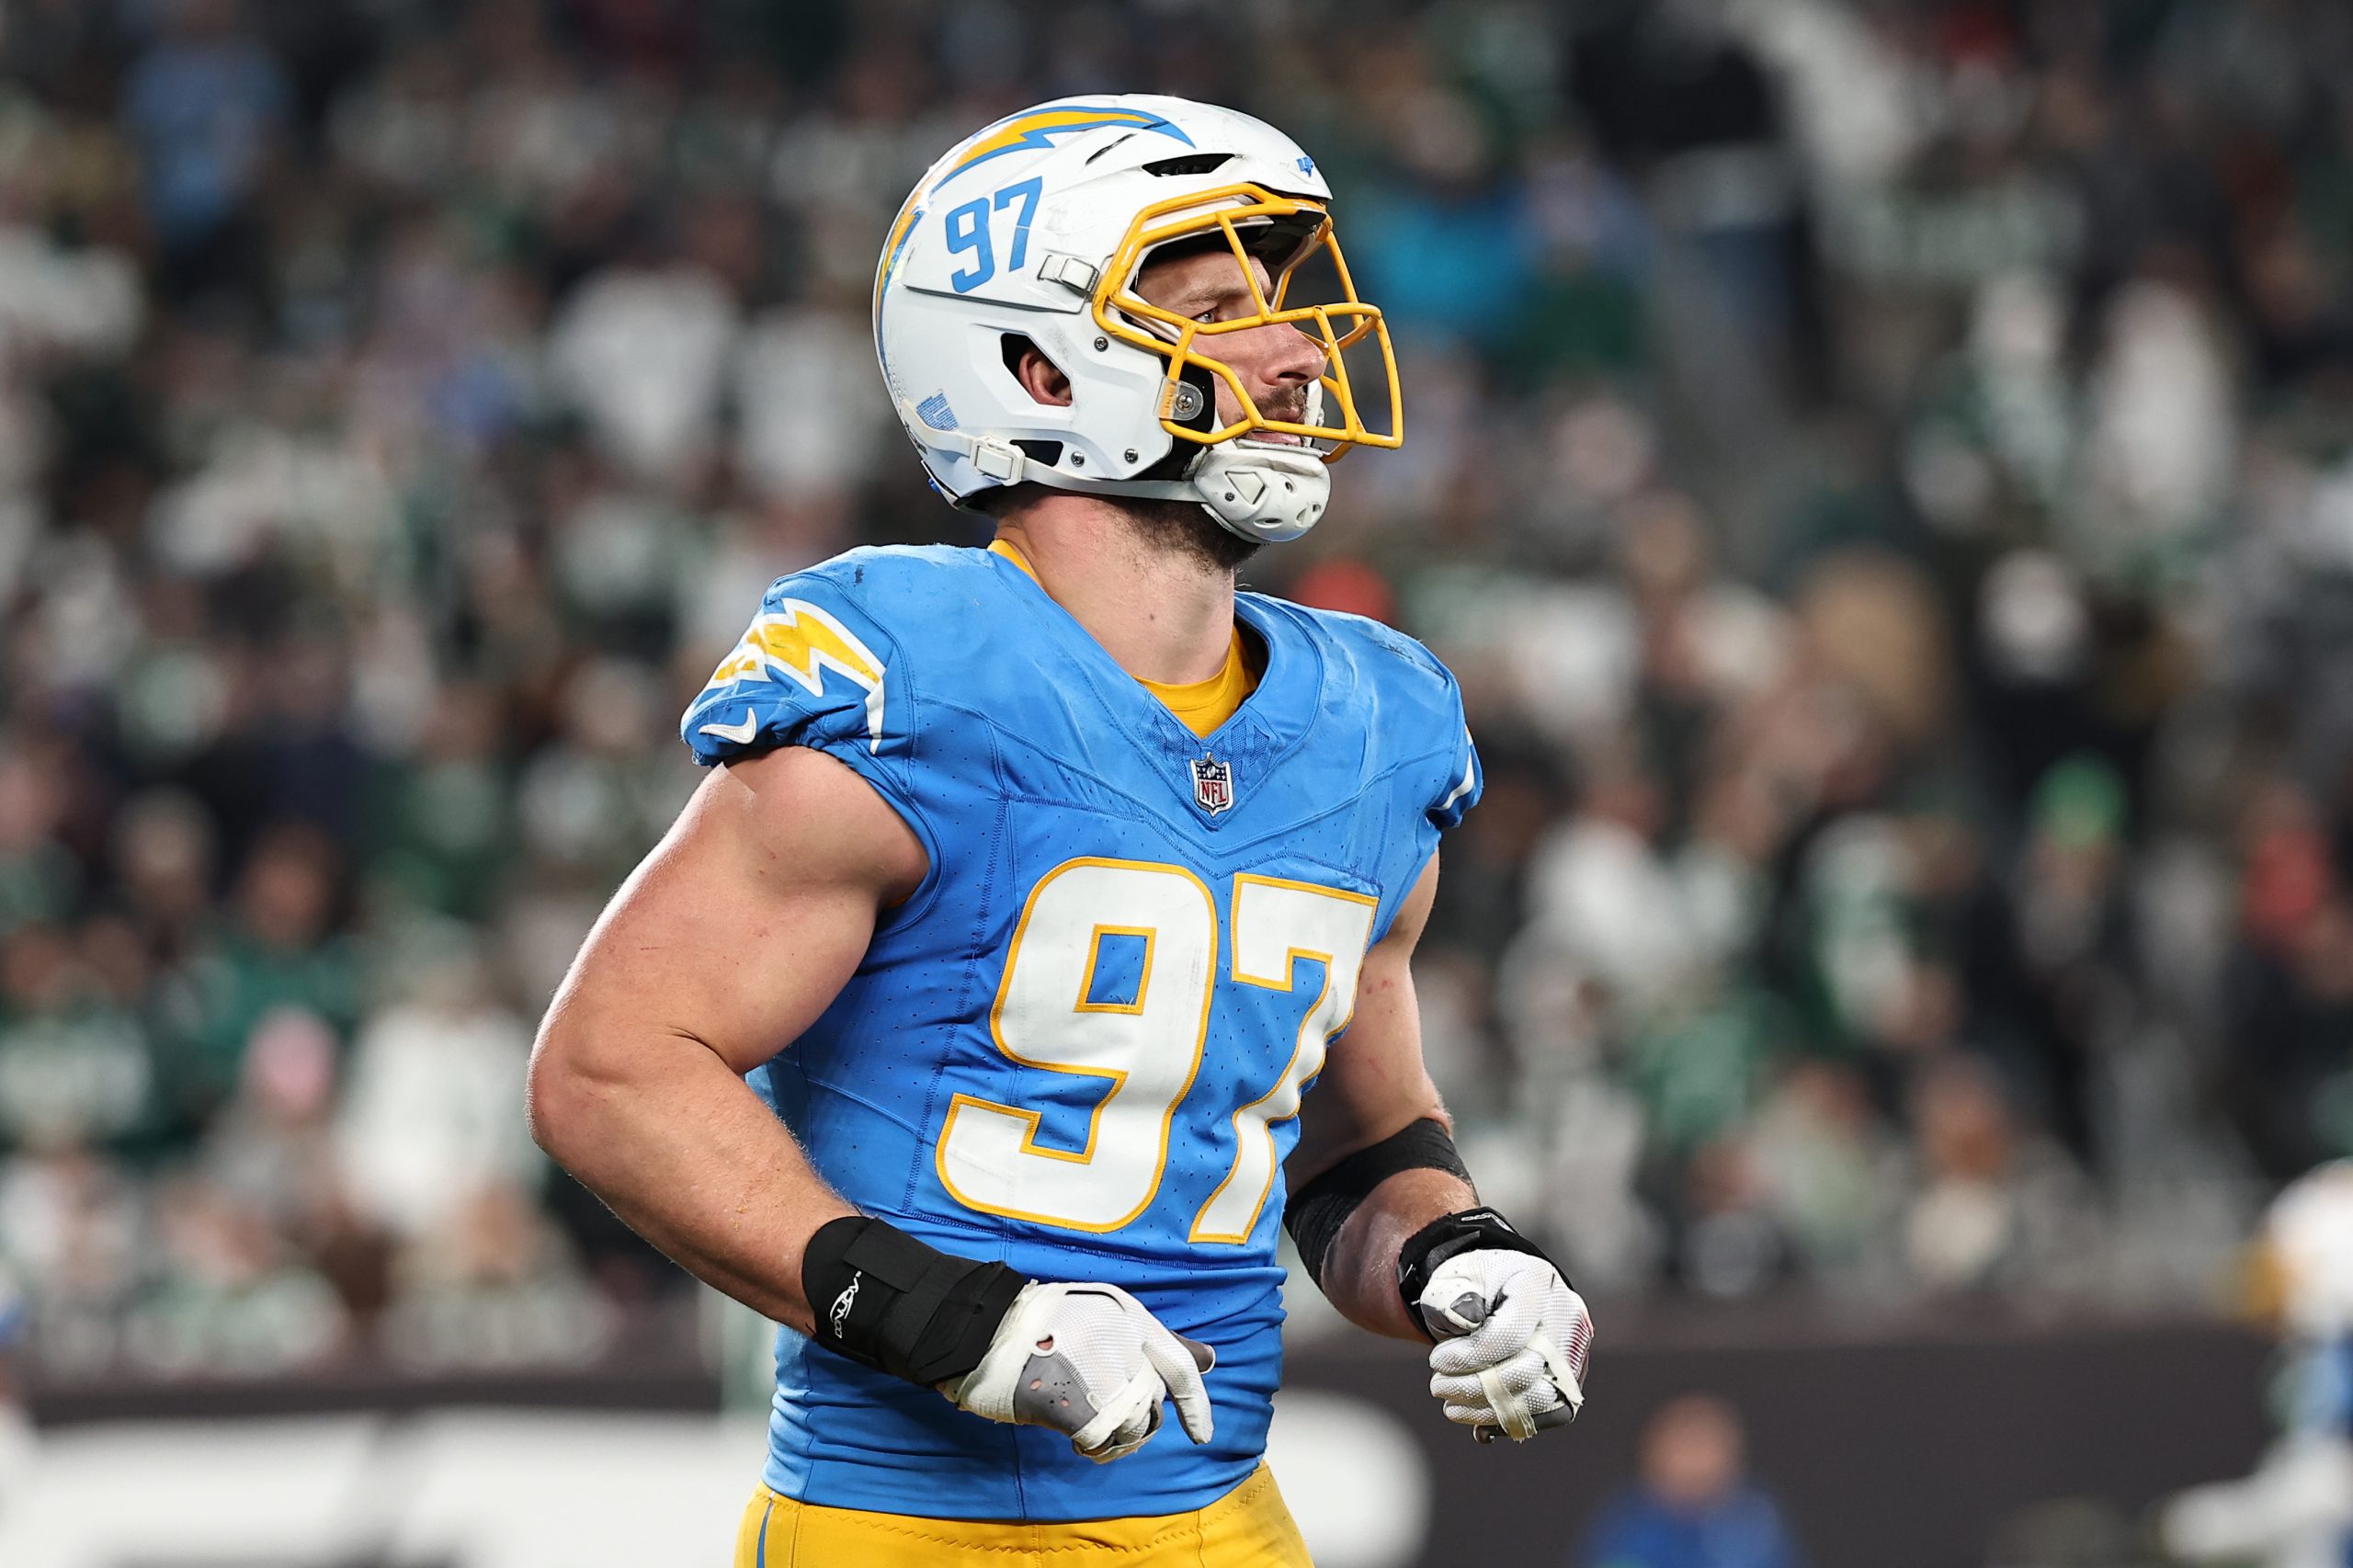 Report: No Joey Bosa for 49ers, agrees to contract restructure with Chargers